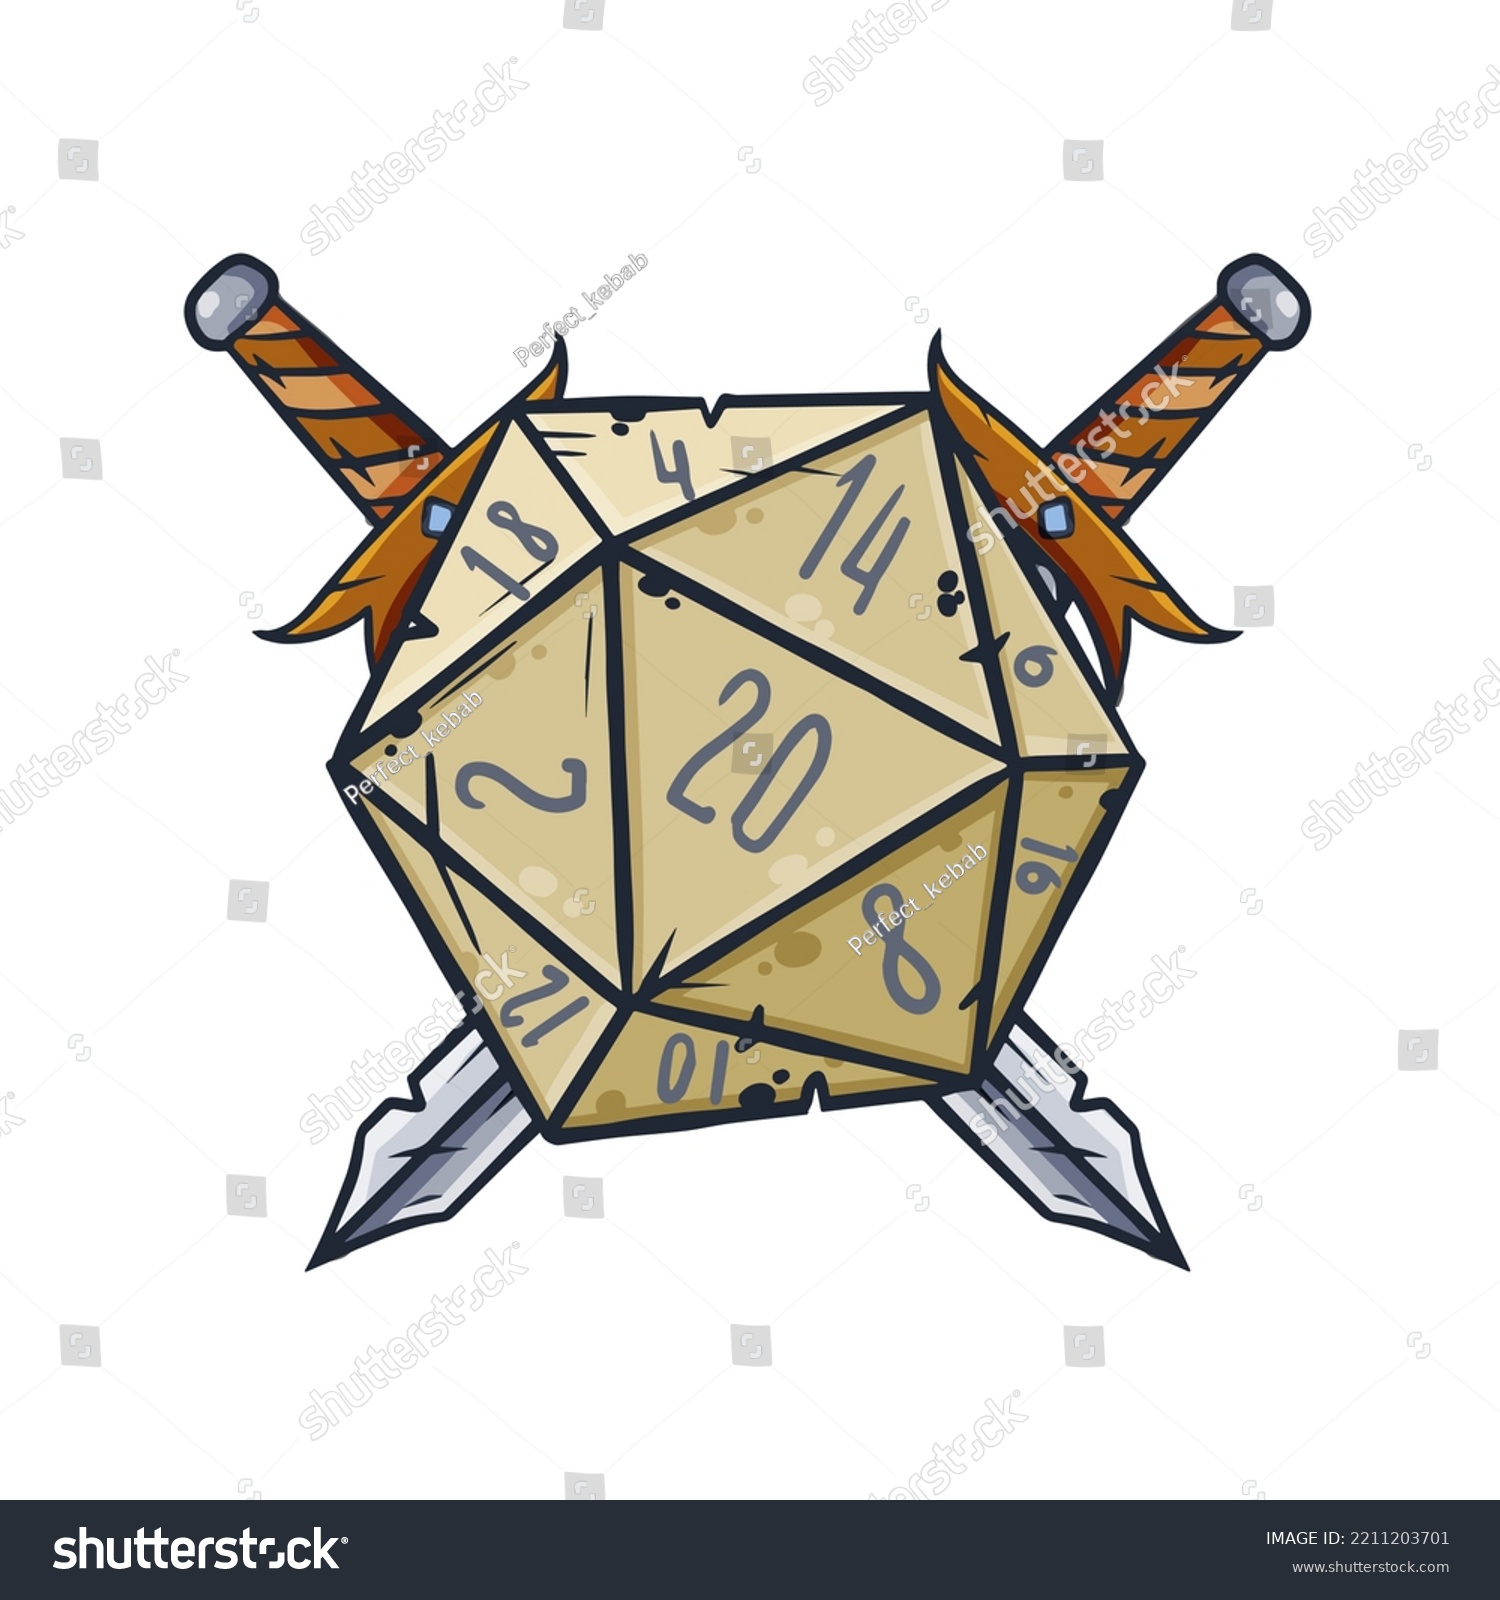 SVG of Dice d20 for playing Dnd. Dungeon and dragons board game. Crossed swords of medieval paladin. Adventure cartoon Icon svg